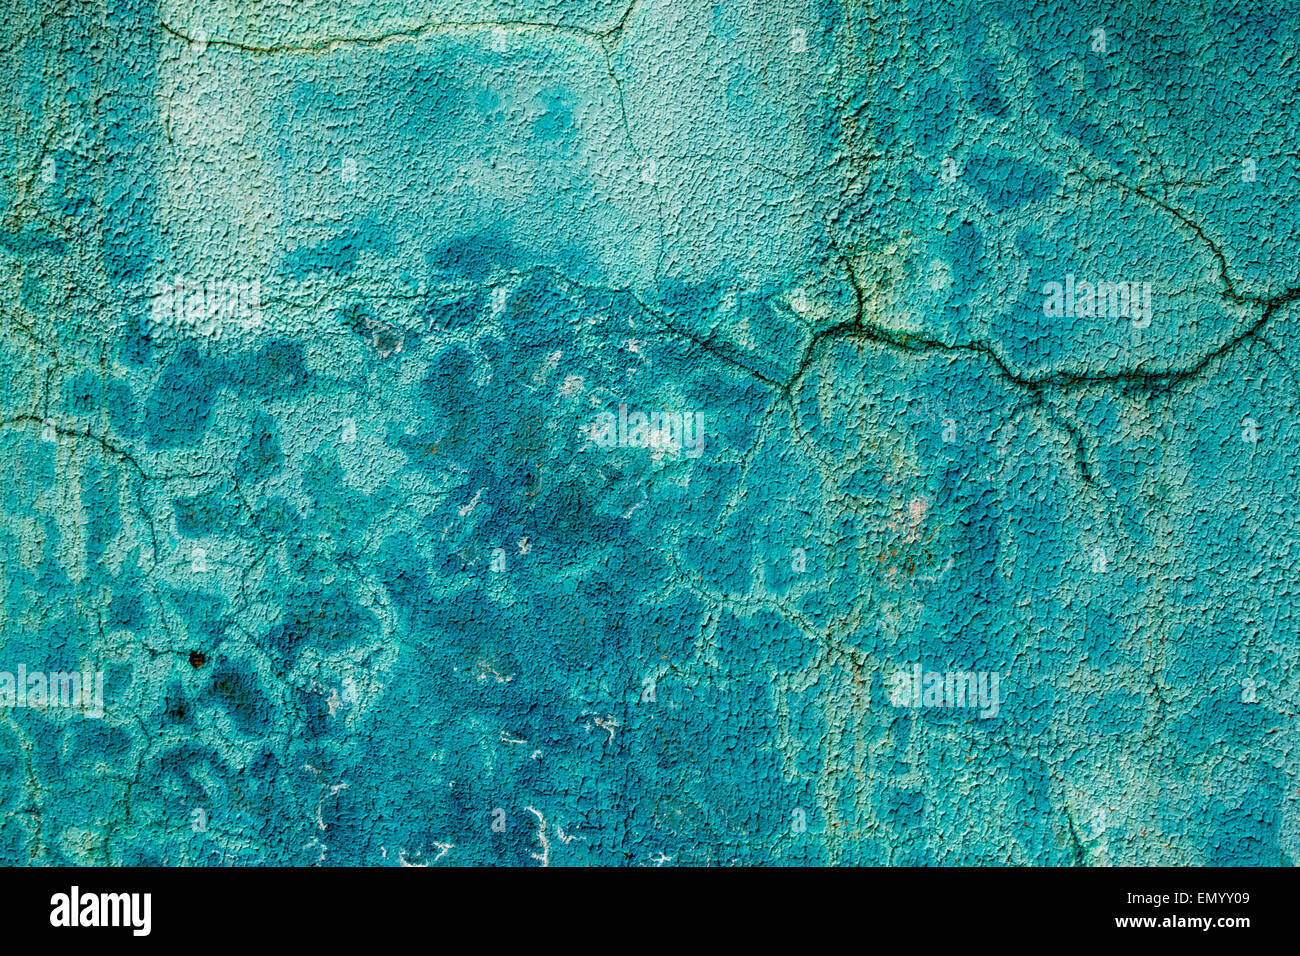 Blue painted wall with cracks and different hues of blue paint Stock Photo